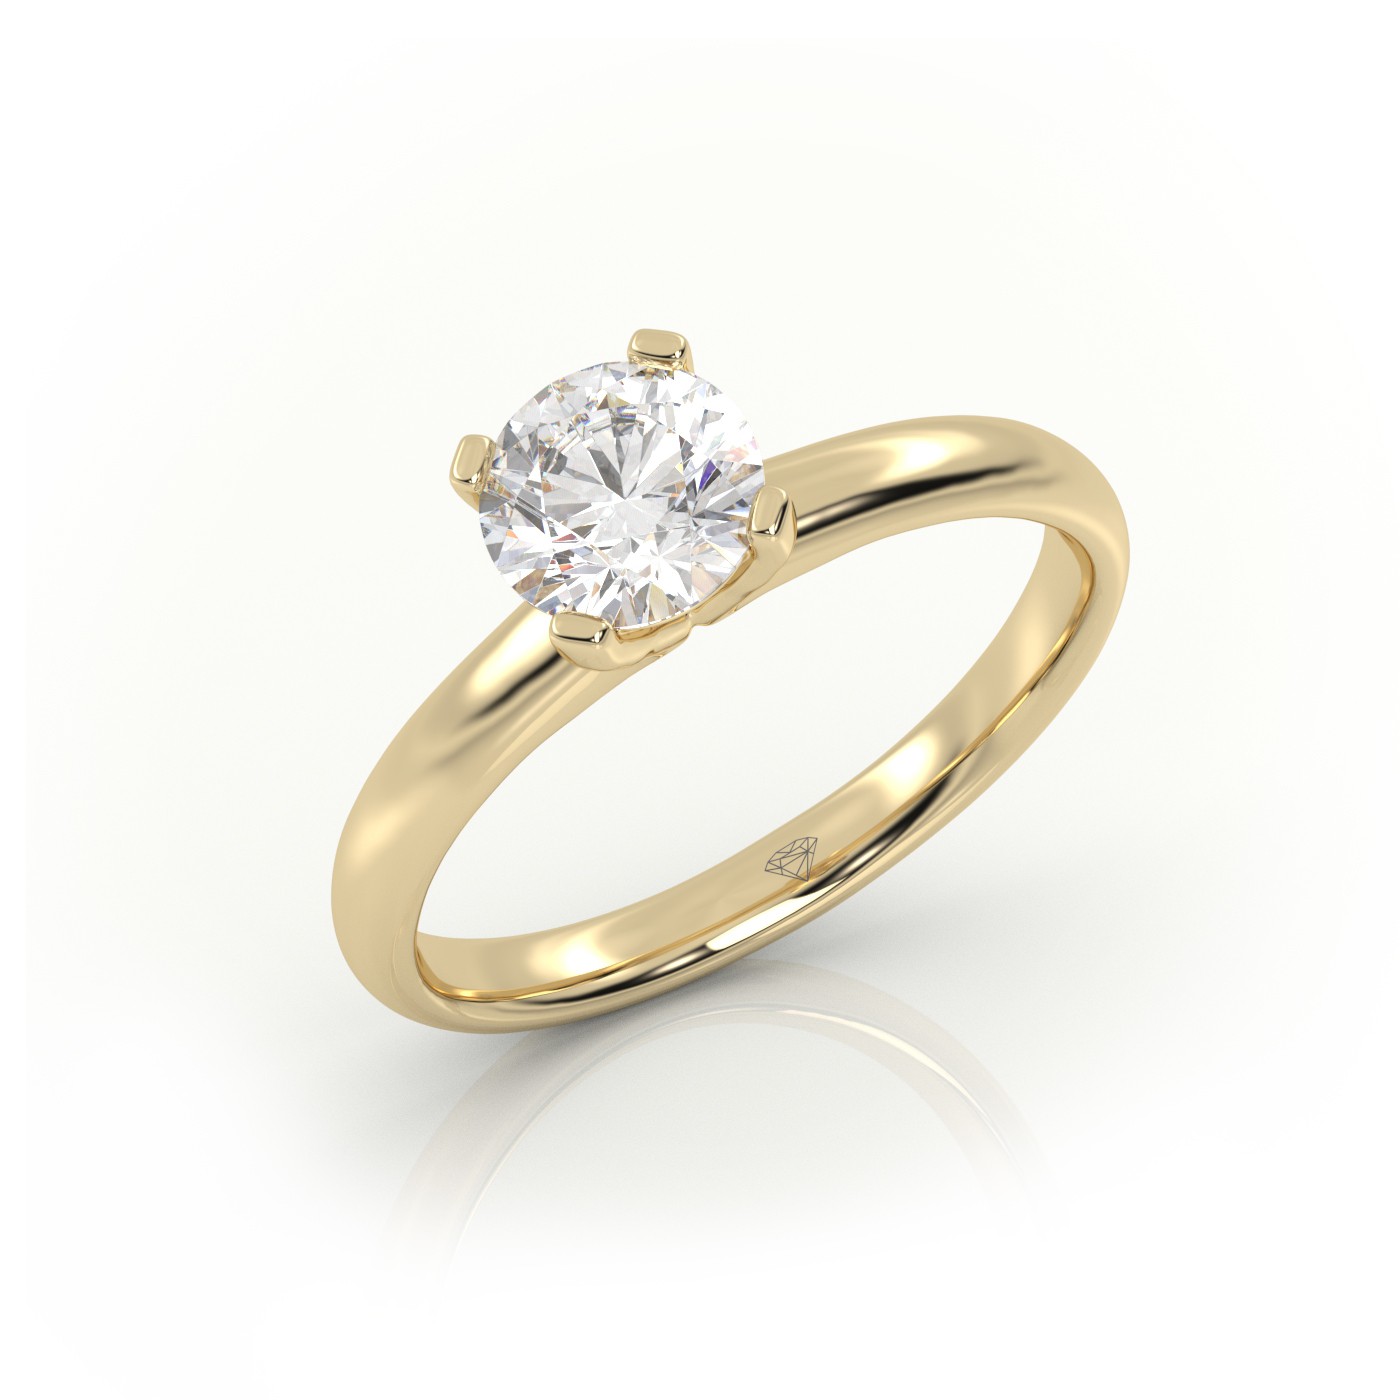 18K YELLOW GOLD ROUND CUT 4 PRONGS SOLITAIRE ENGAGEMENT RING